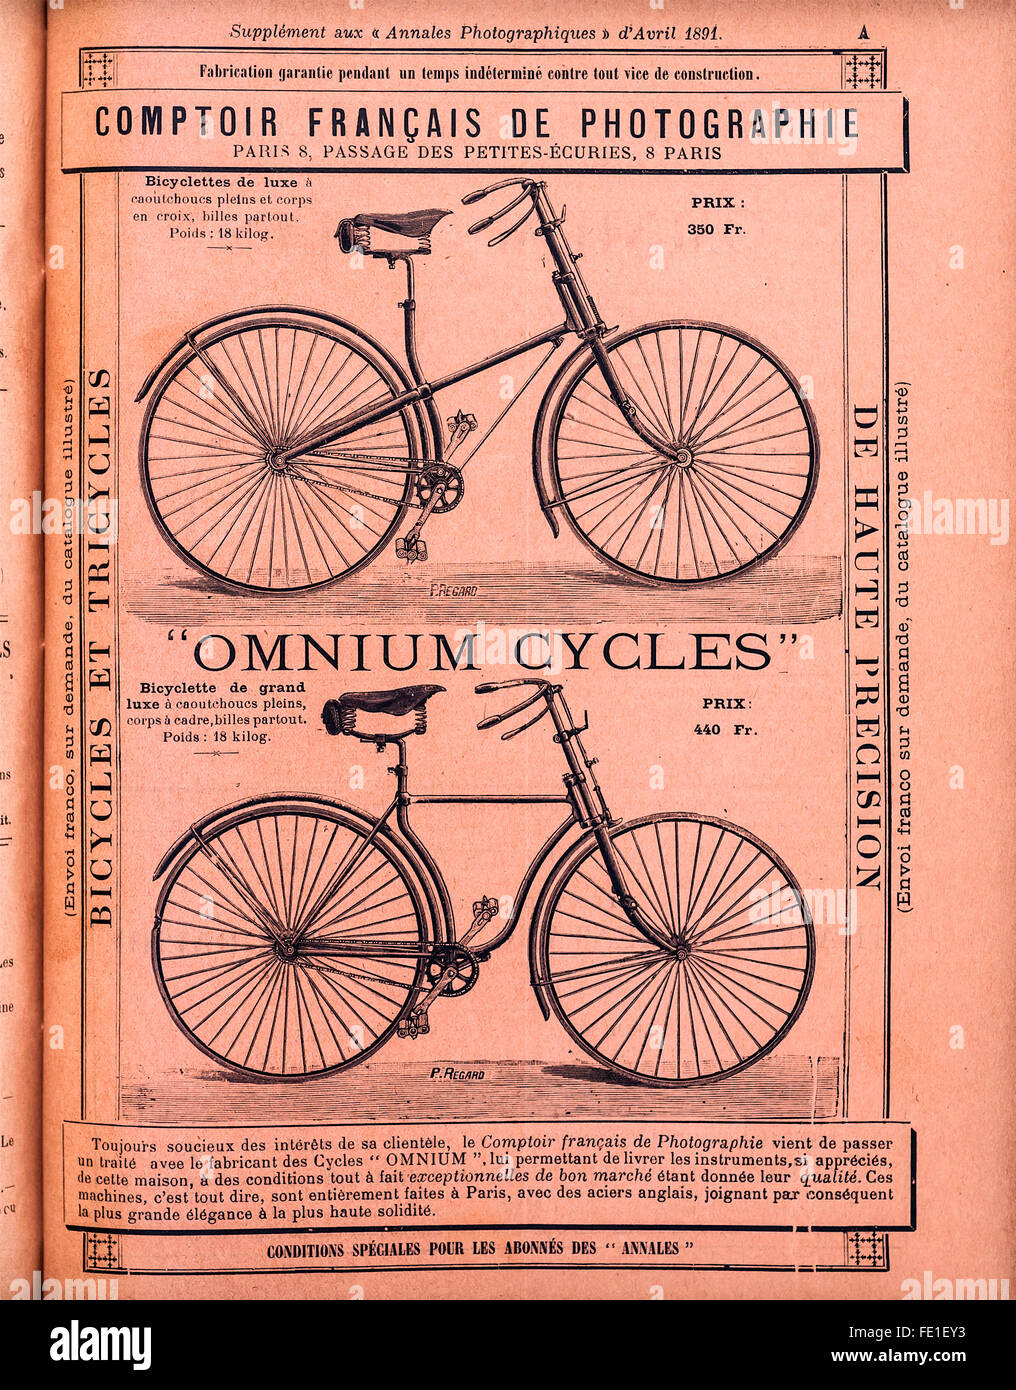 1890s advert for “Omnium Cycles” bicycle from French magazine. Stock Photo